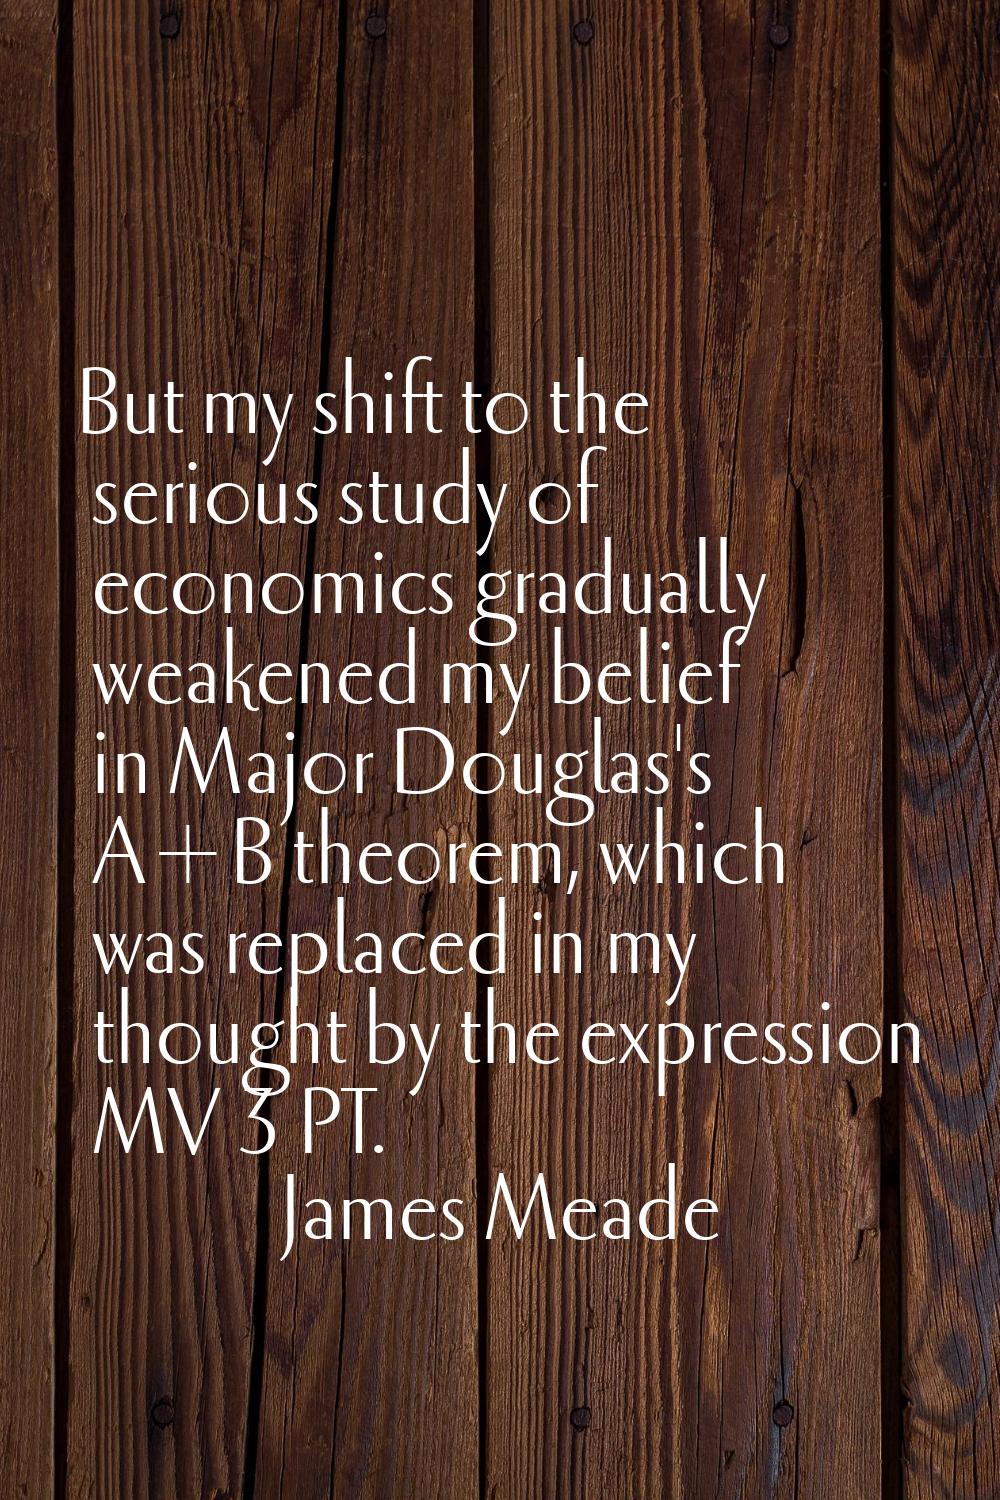 But my shift to the serious study of economics gradually weakened my belief in Major Douglas's A+B 